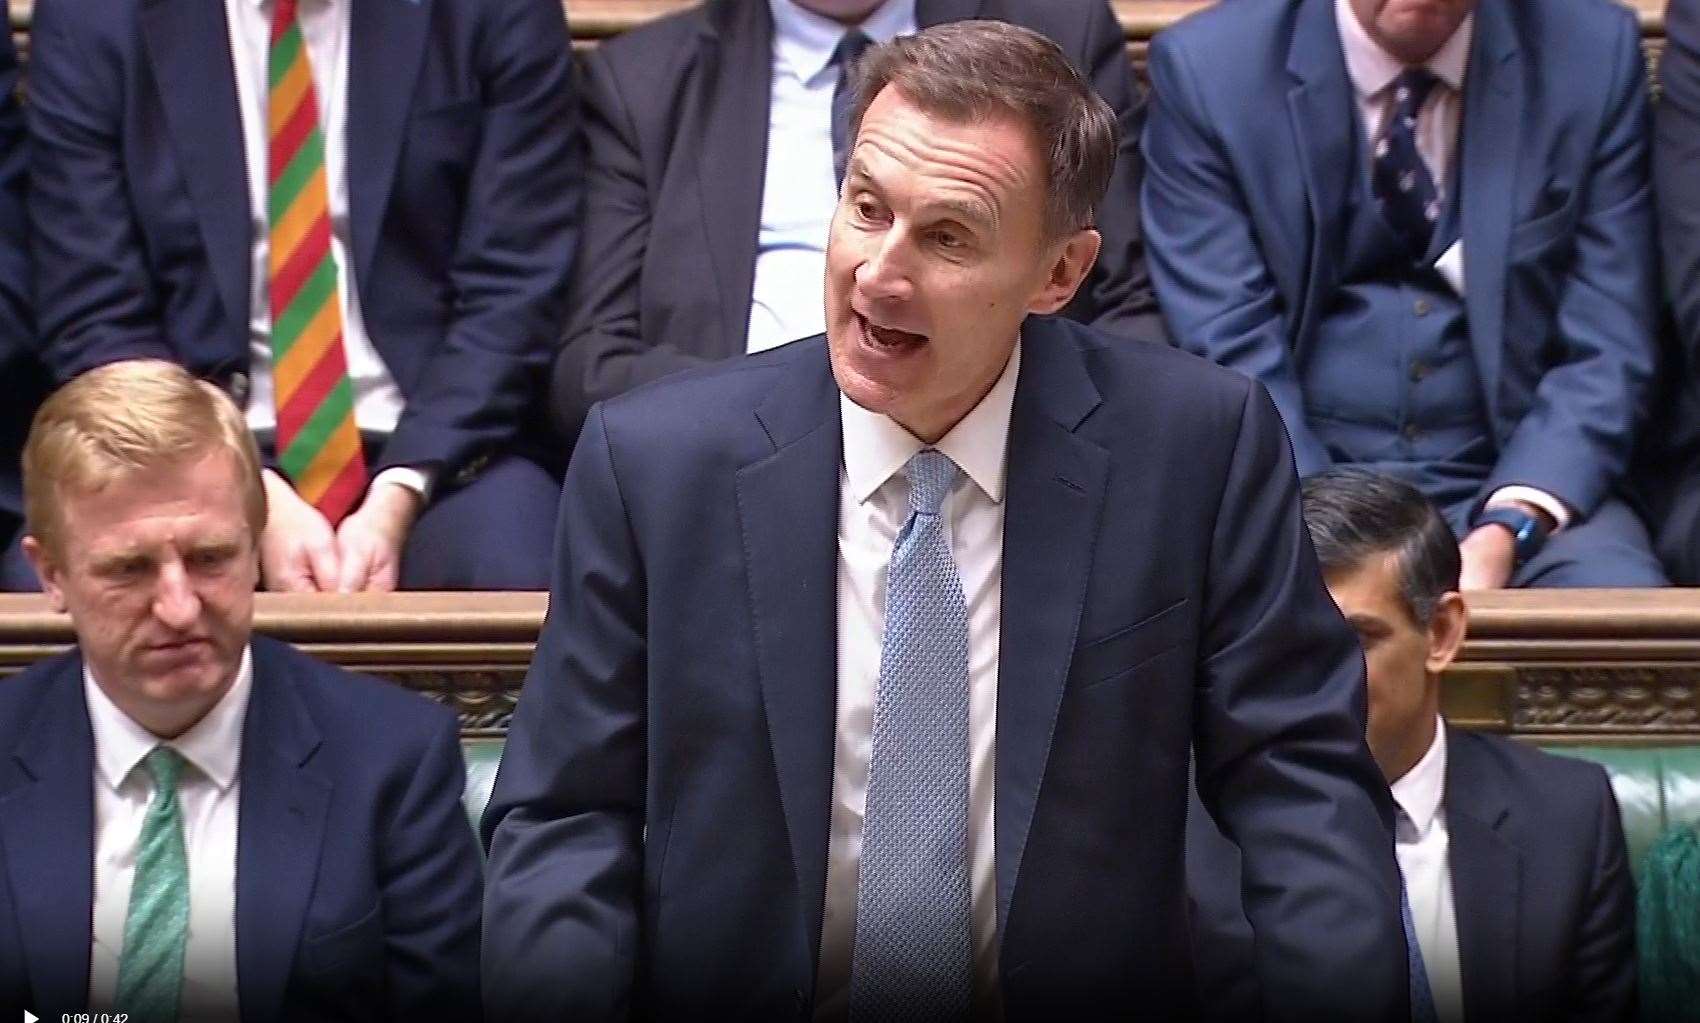 Chancellor of the Exchequer Jeremy Hunt (House of Commons/UK Parliament/PA)